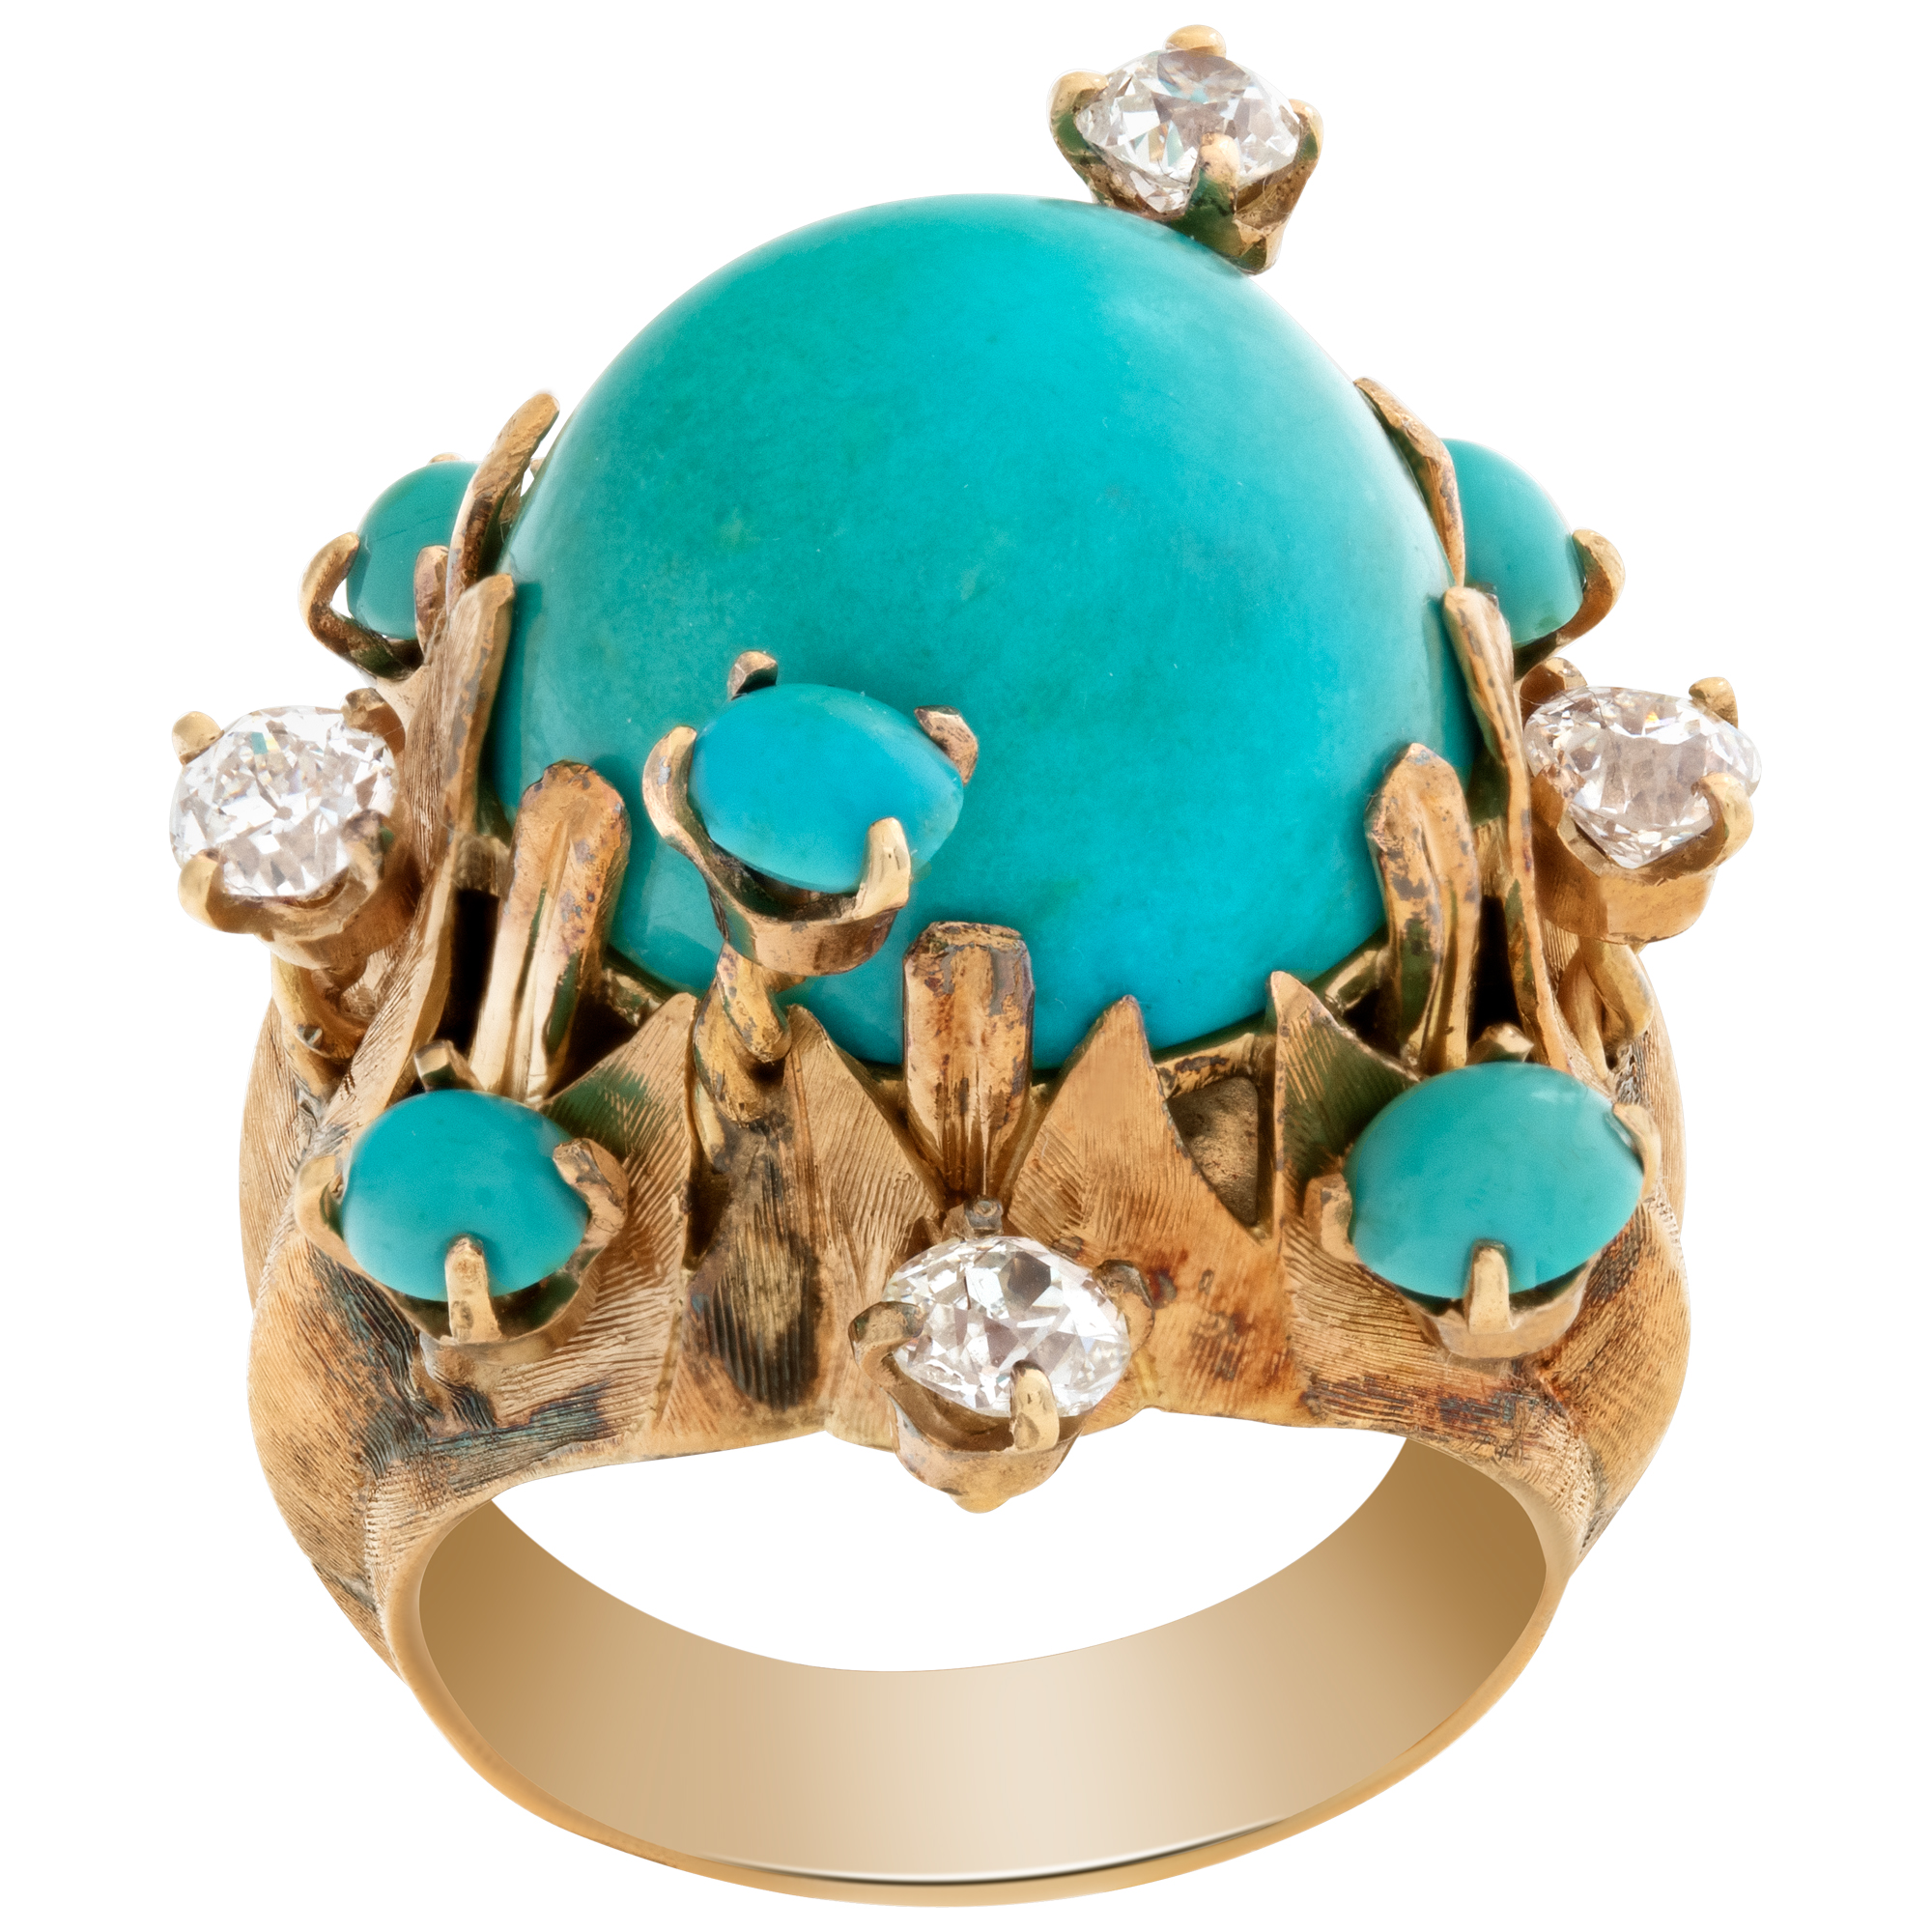 Cabochon Turquoise ring with round brilliant cut diamonds set in 18k